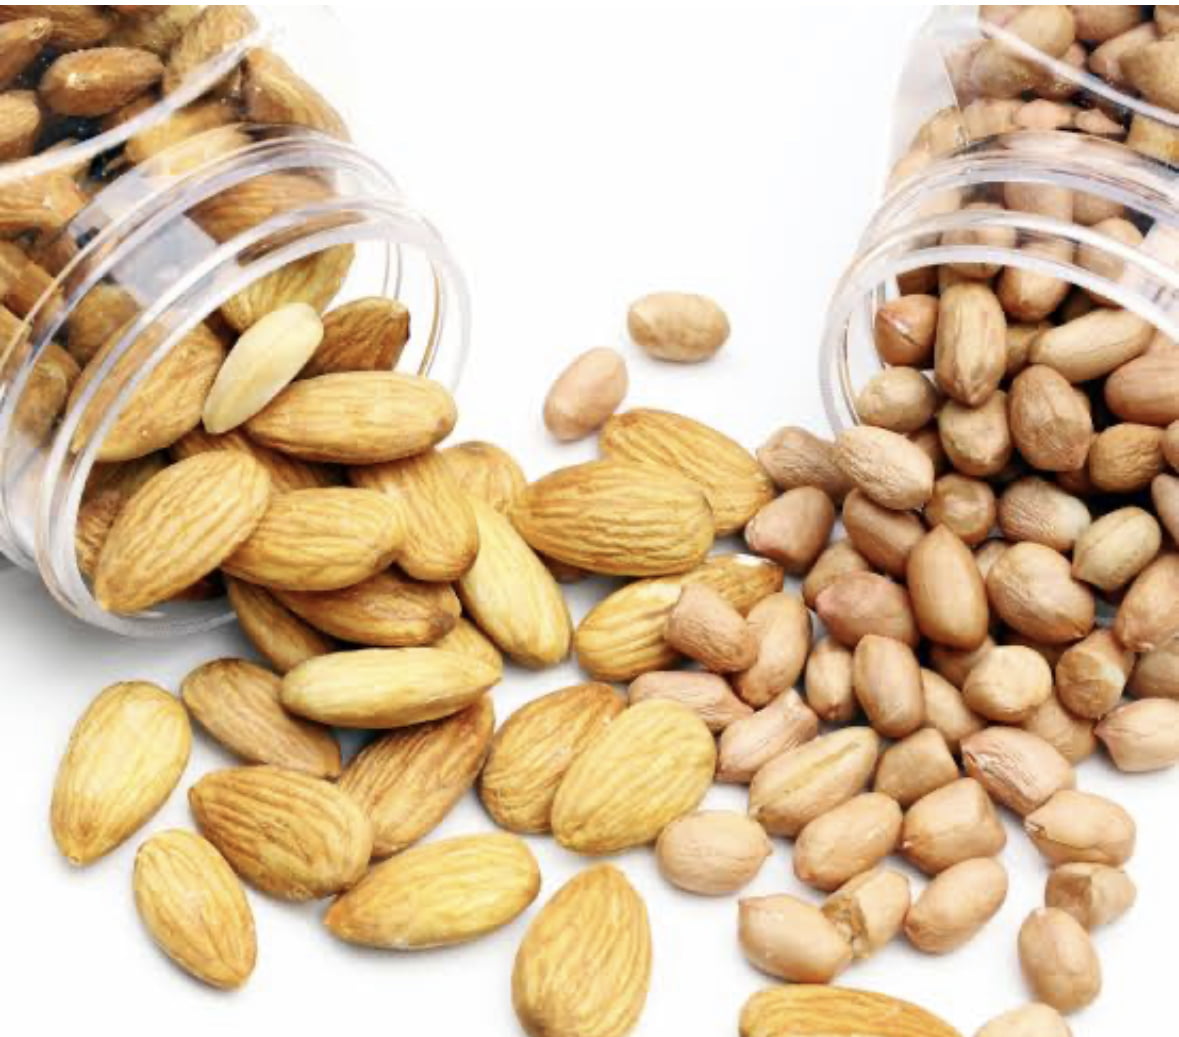 Peanut Vs Almonds: Which Nut Has More Nutrients?